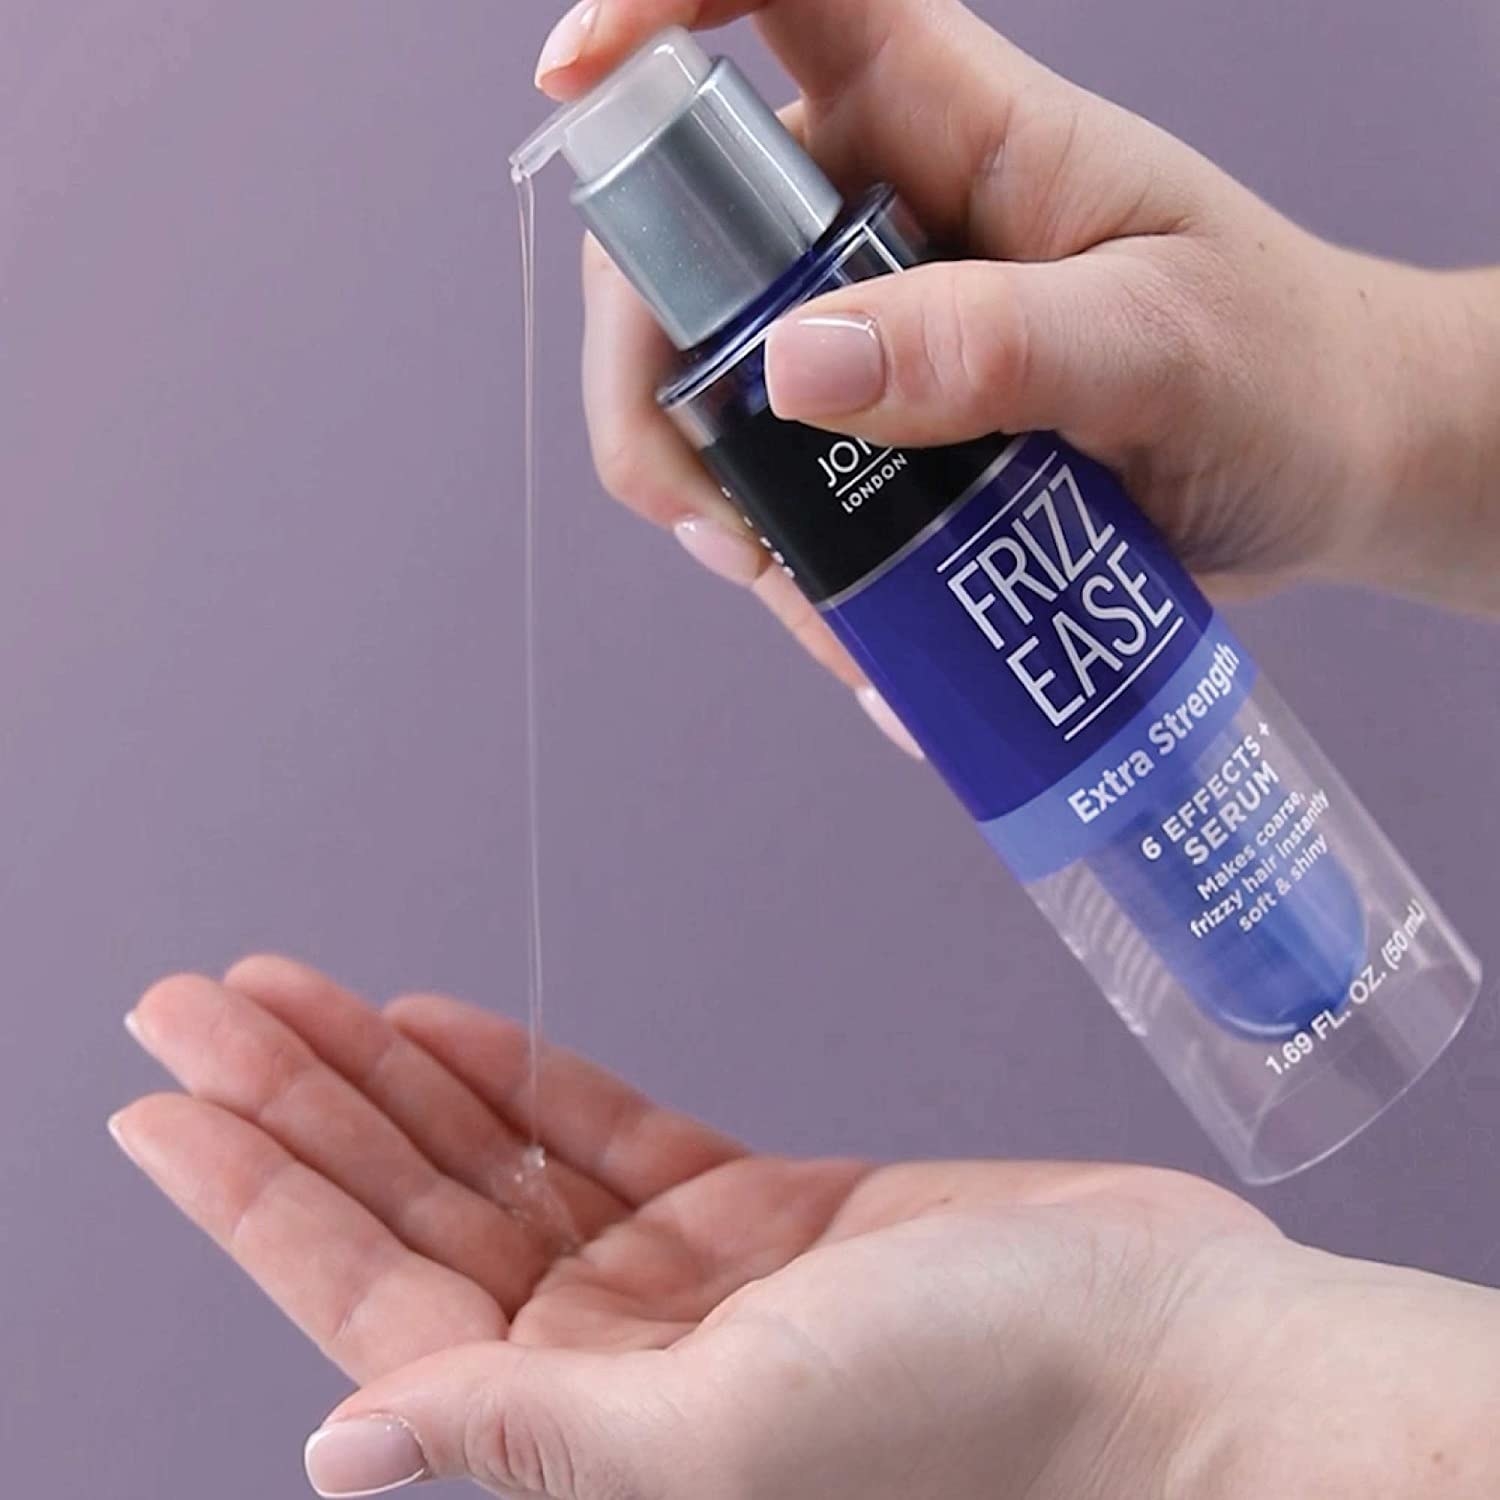 the product being squirt into a hand 